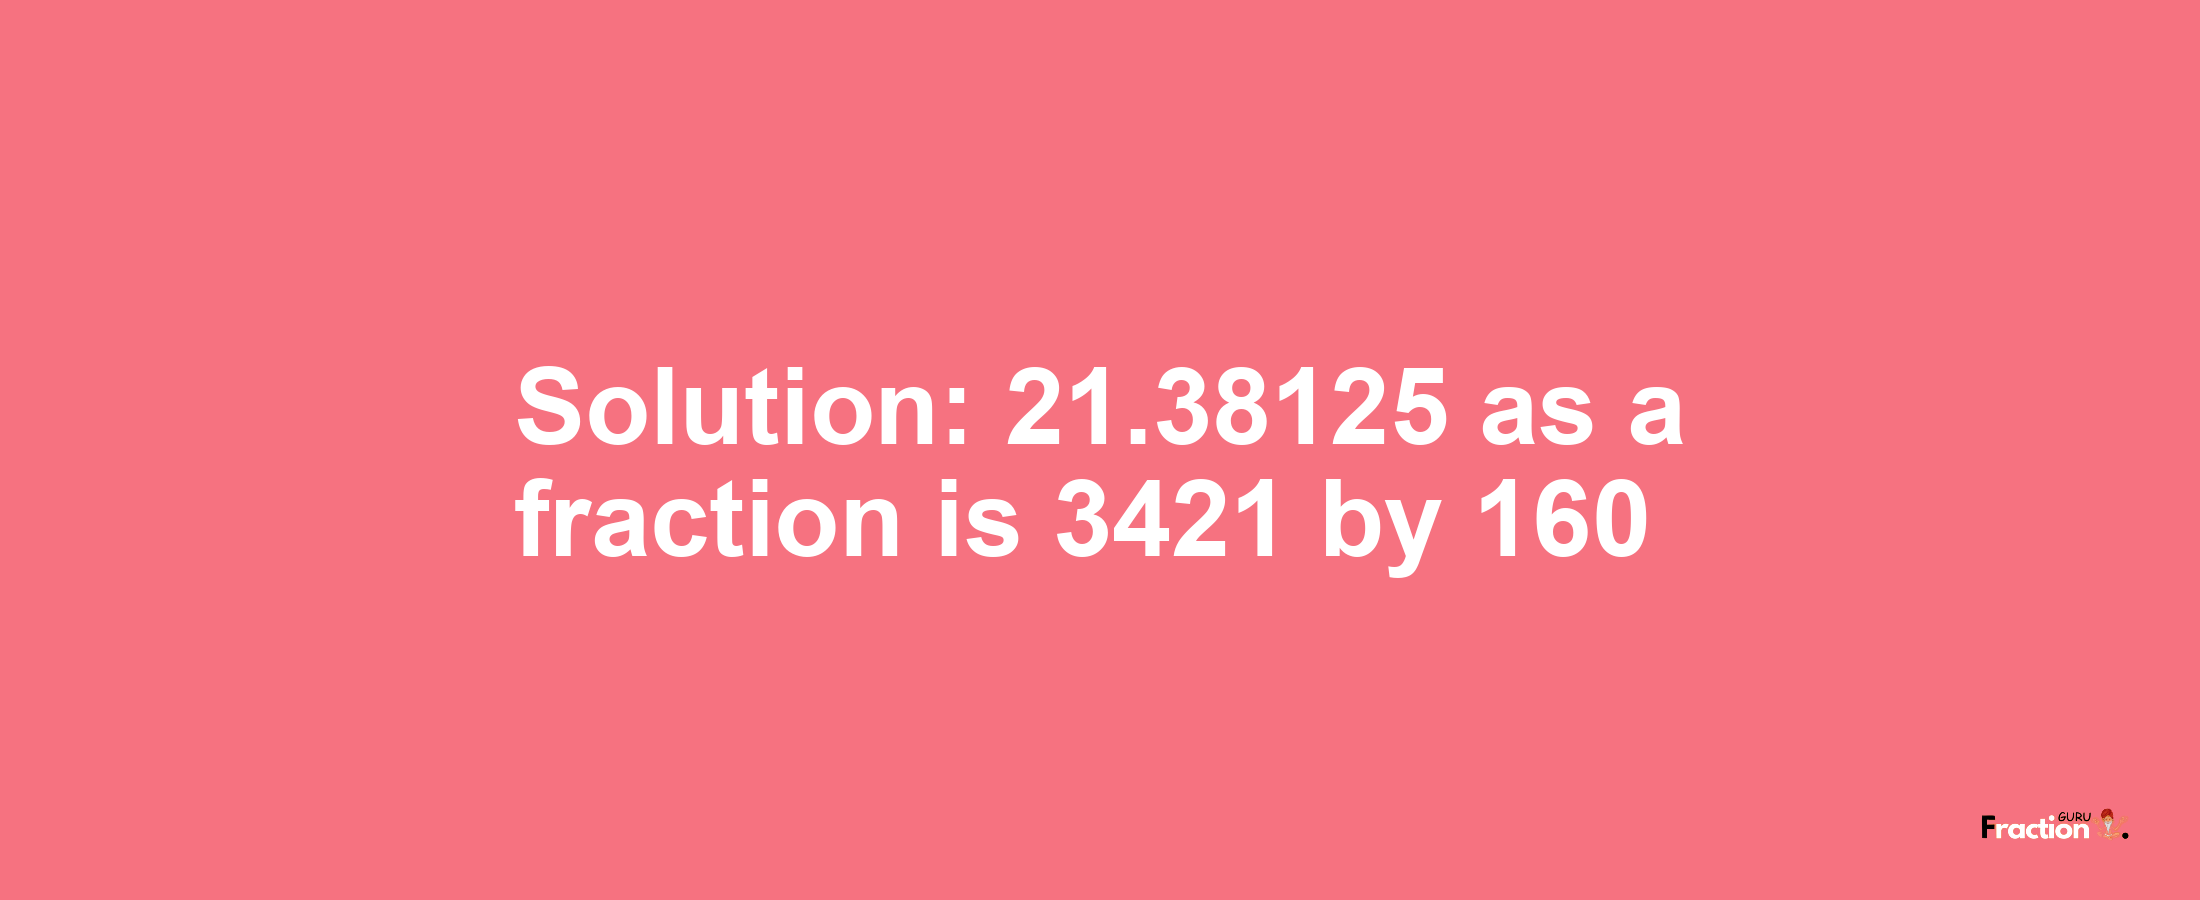 Solution:21.38125 as a fraction is 3421/160